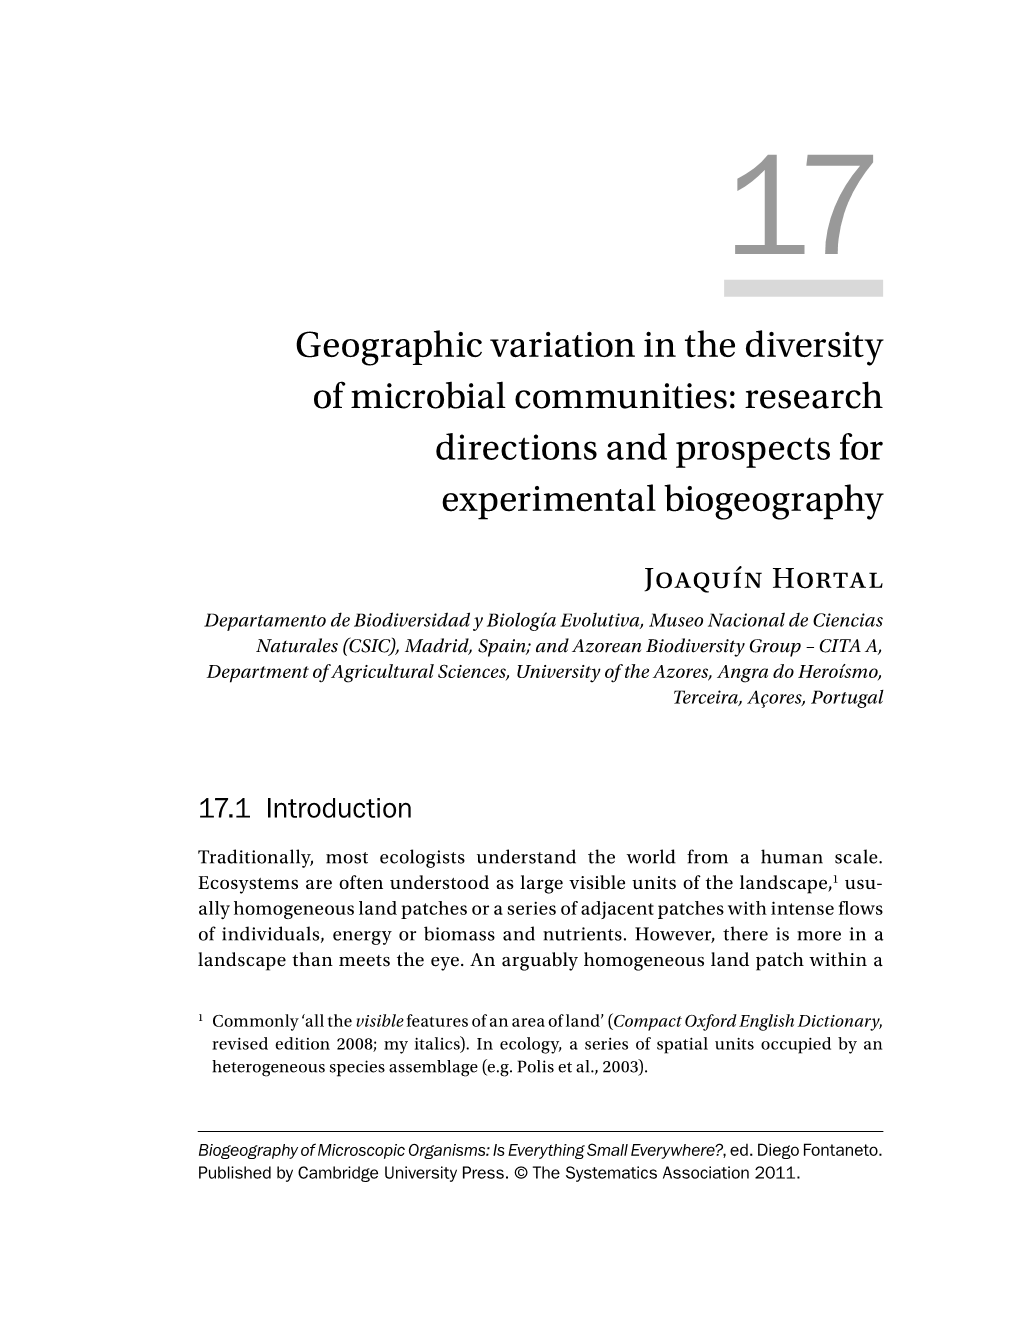 Geographic Variation in the Diversity of Microbial Communities: Research Directions and Prospects for Experimental Biogeography